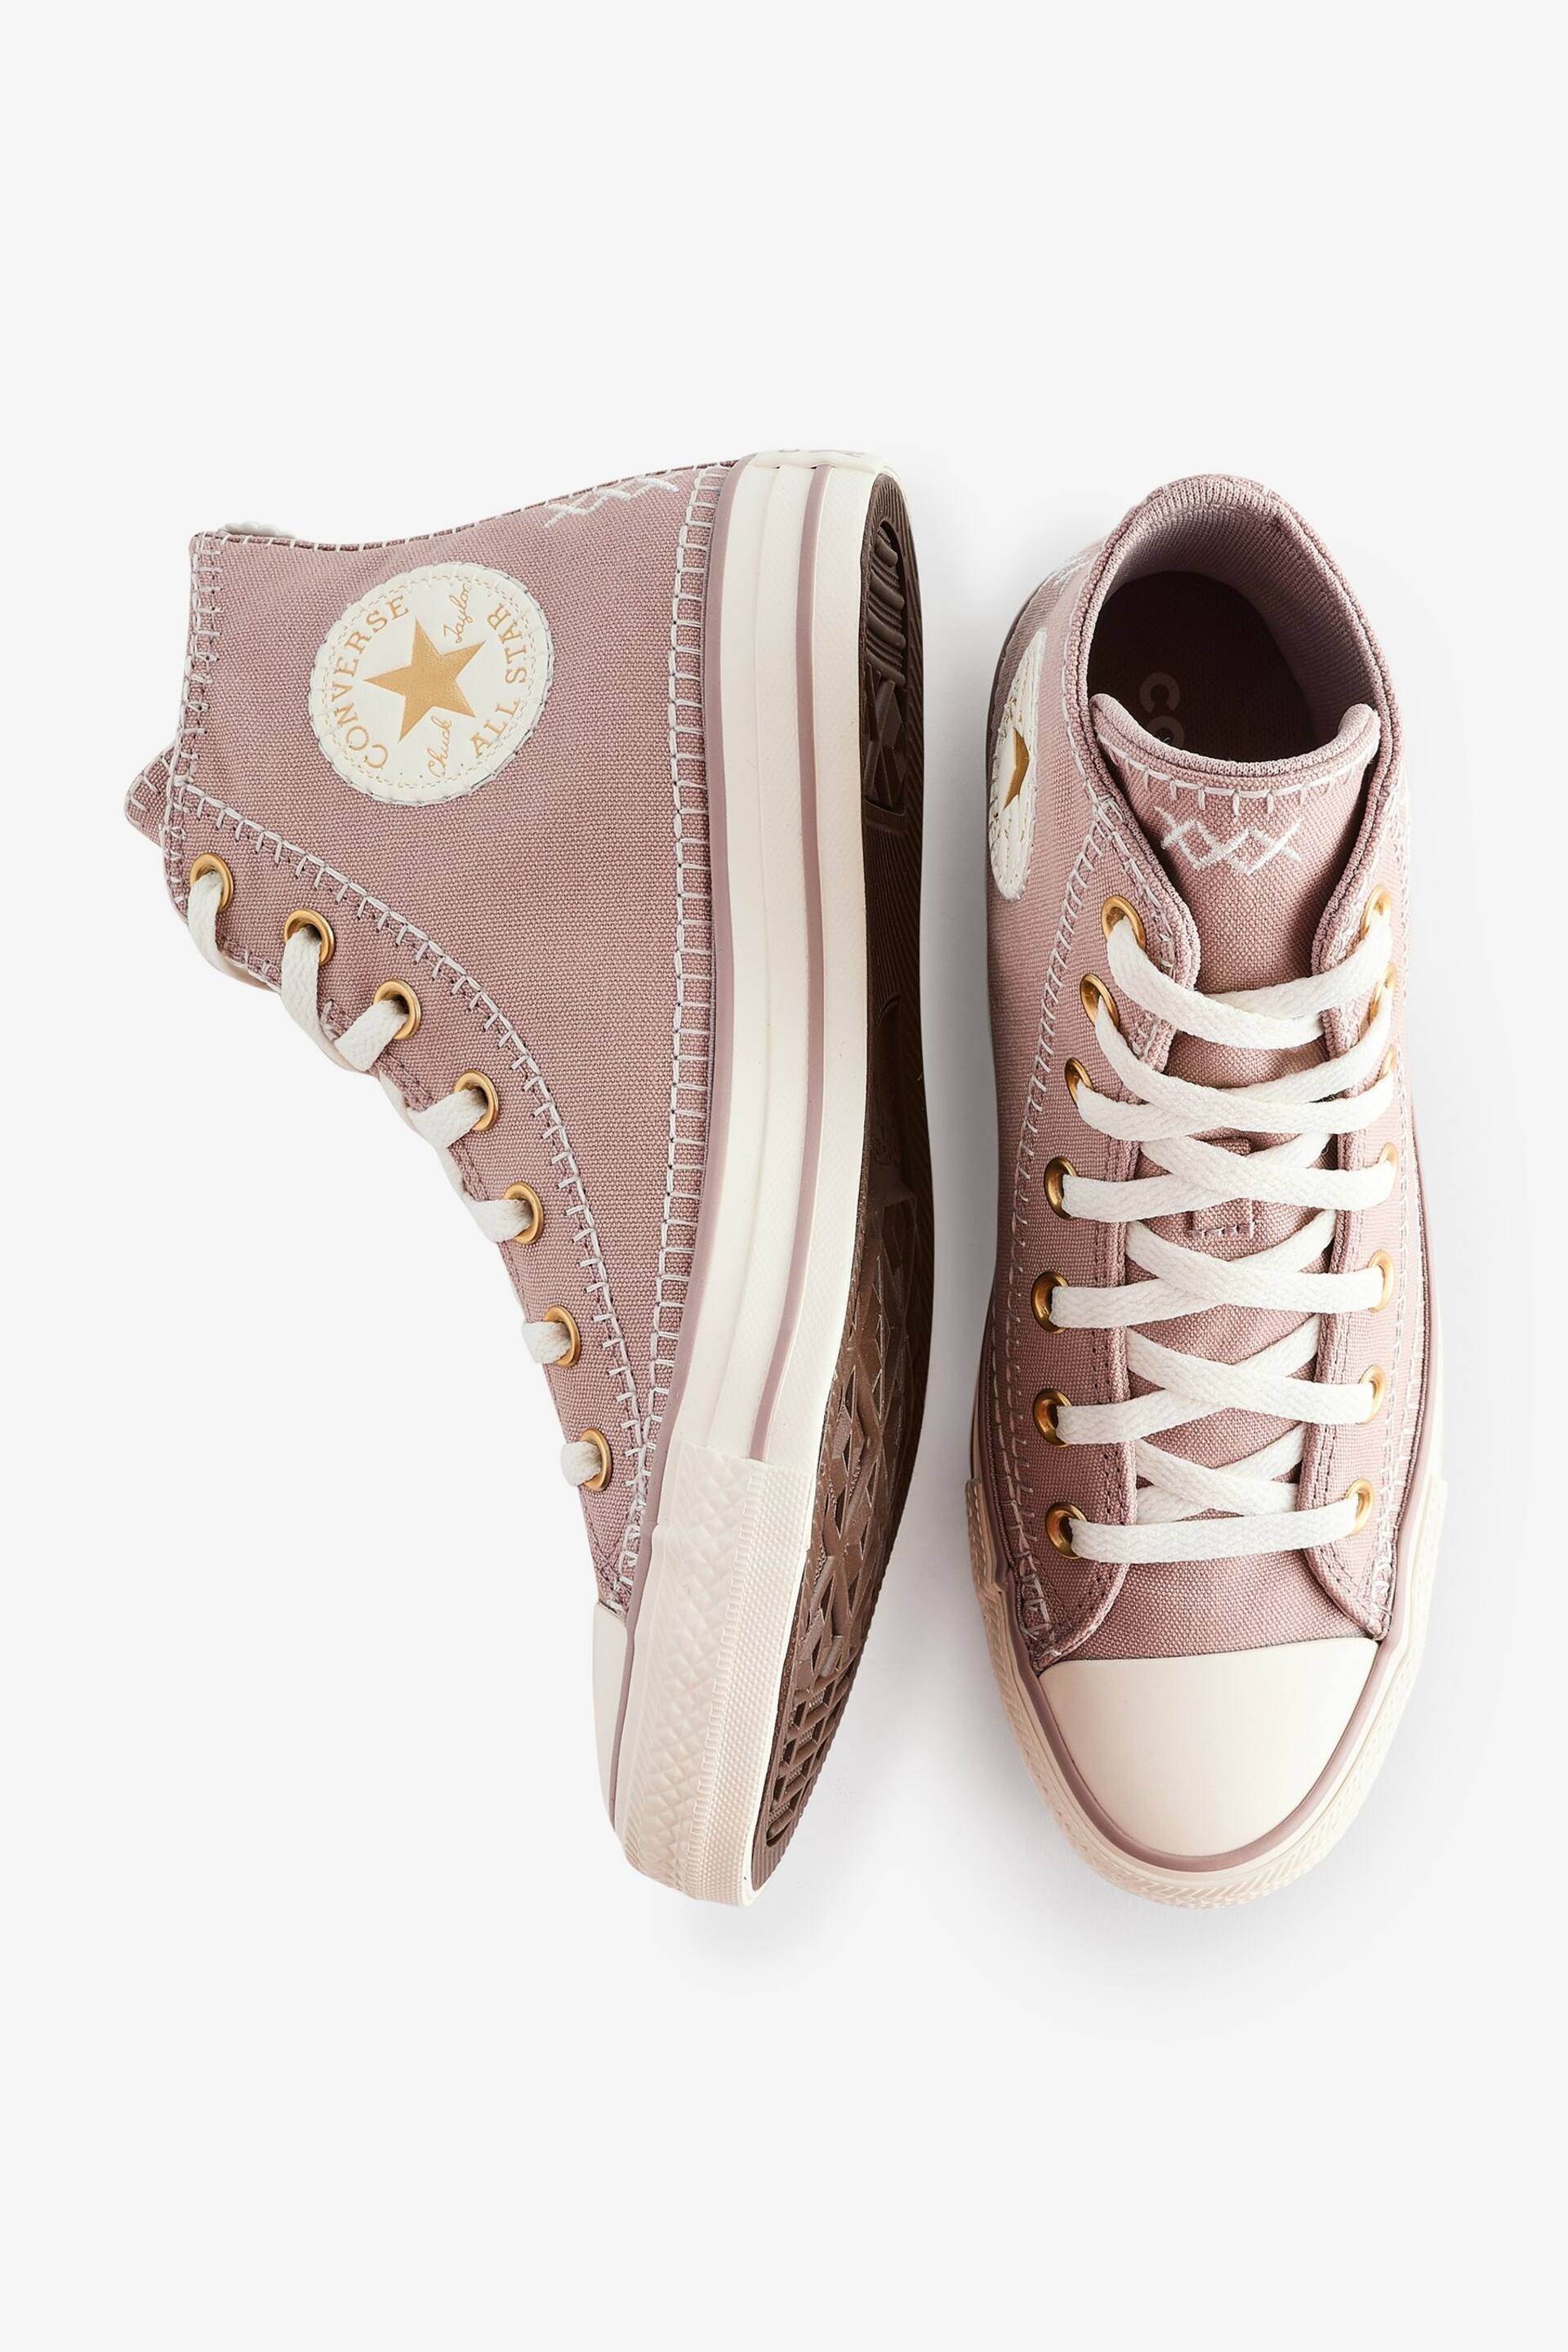 Converse Neutral Chuck Taylor All Star High Top Trainers - Image 9 of 9